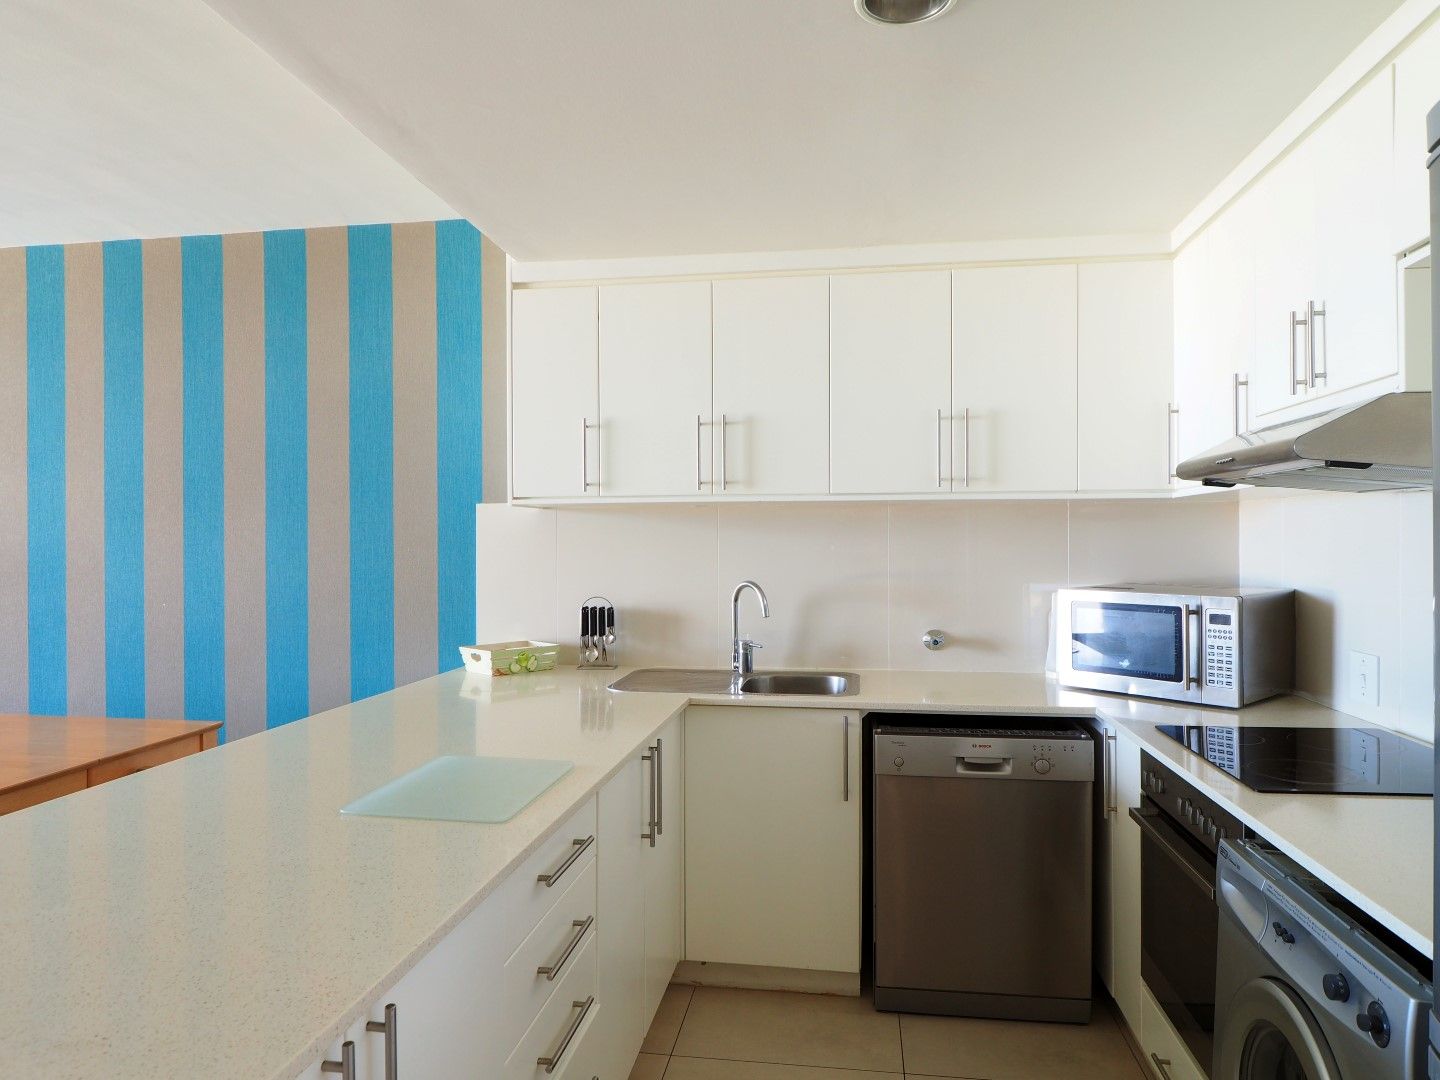 Photo 15 of Dolphin Beach Beauty accommodation in Bloubergstrand, Cape Town with 3 bedrooms and 2 bathrooms